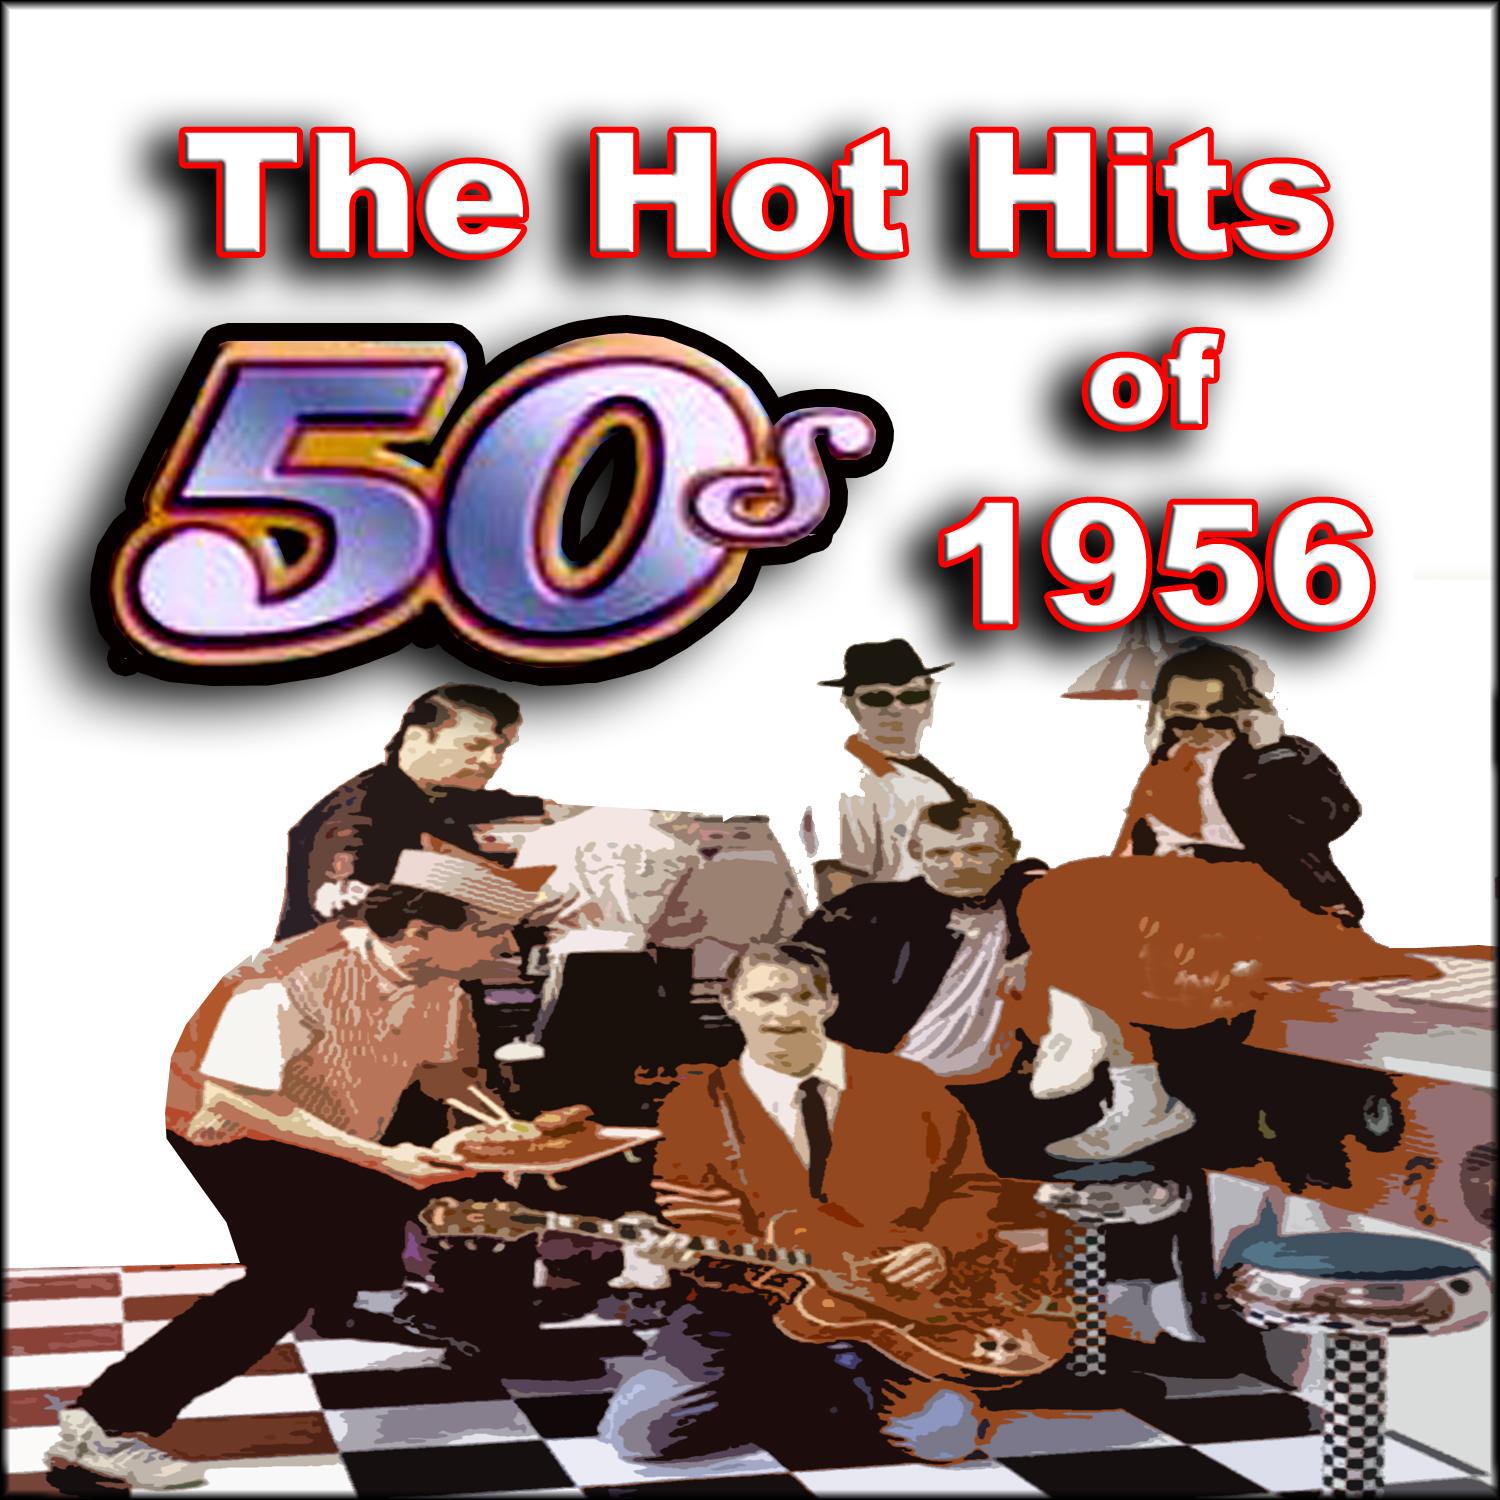 The Hot Hits of 1956